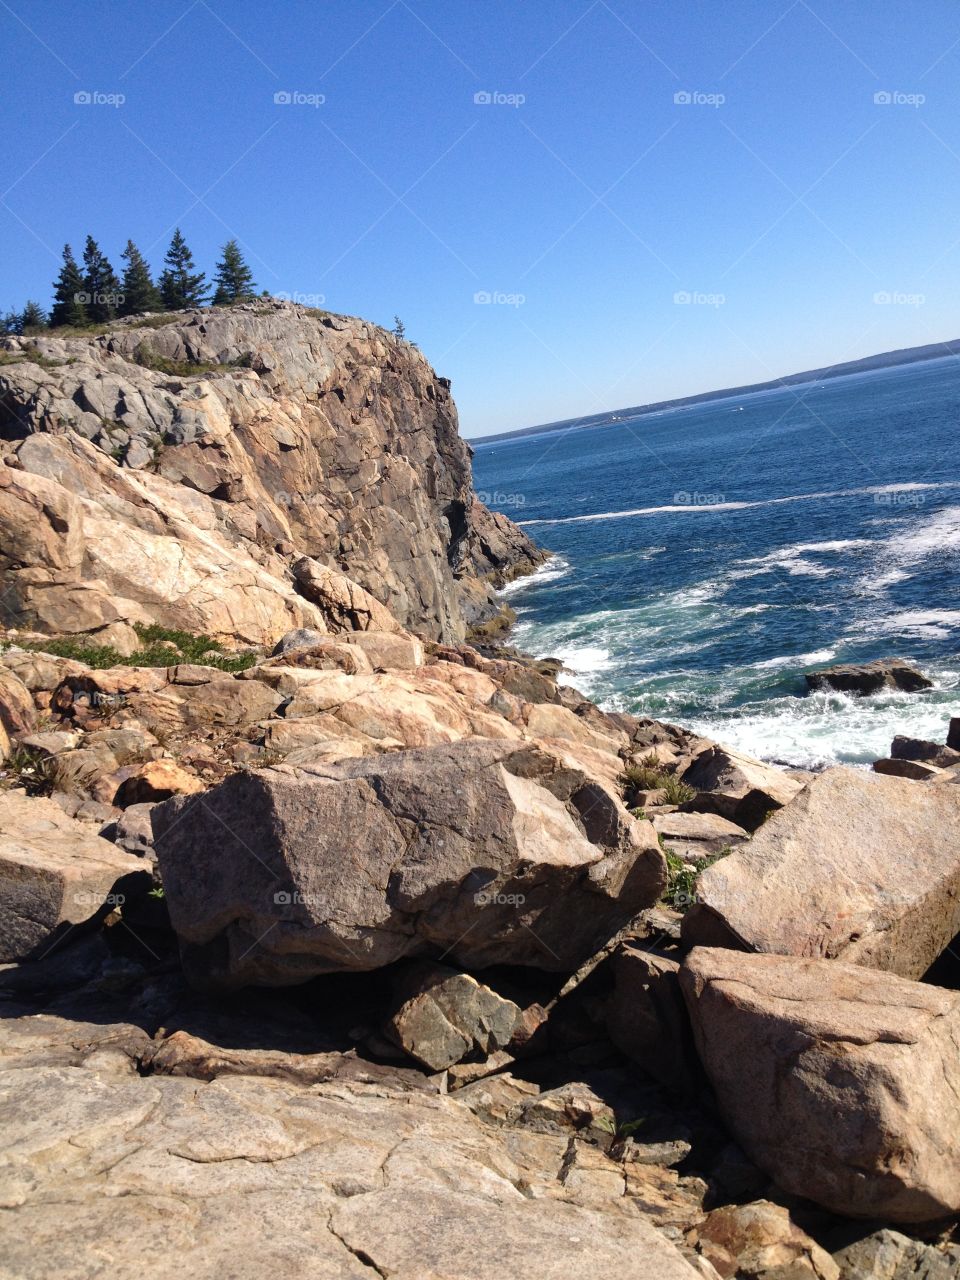 Cliffs & ocean in Maine. This is a view of the cliffs ocean along the Maine coastline